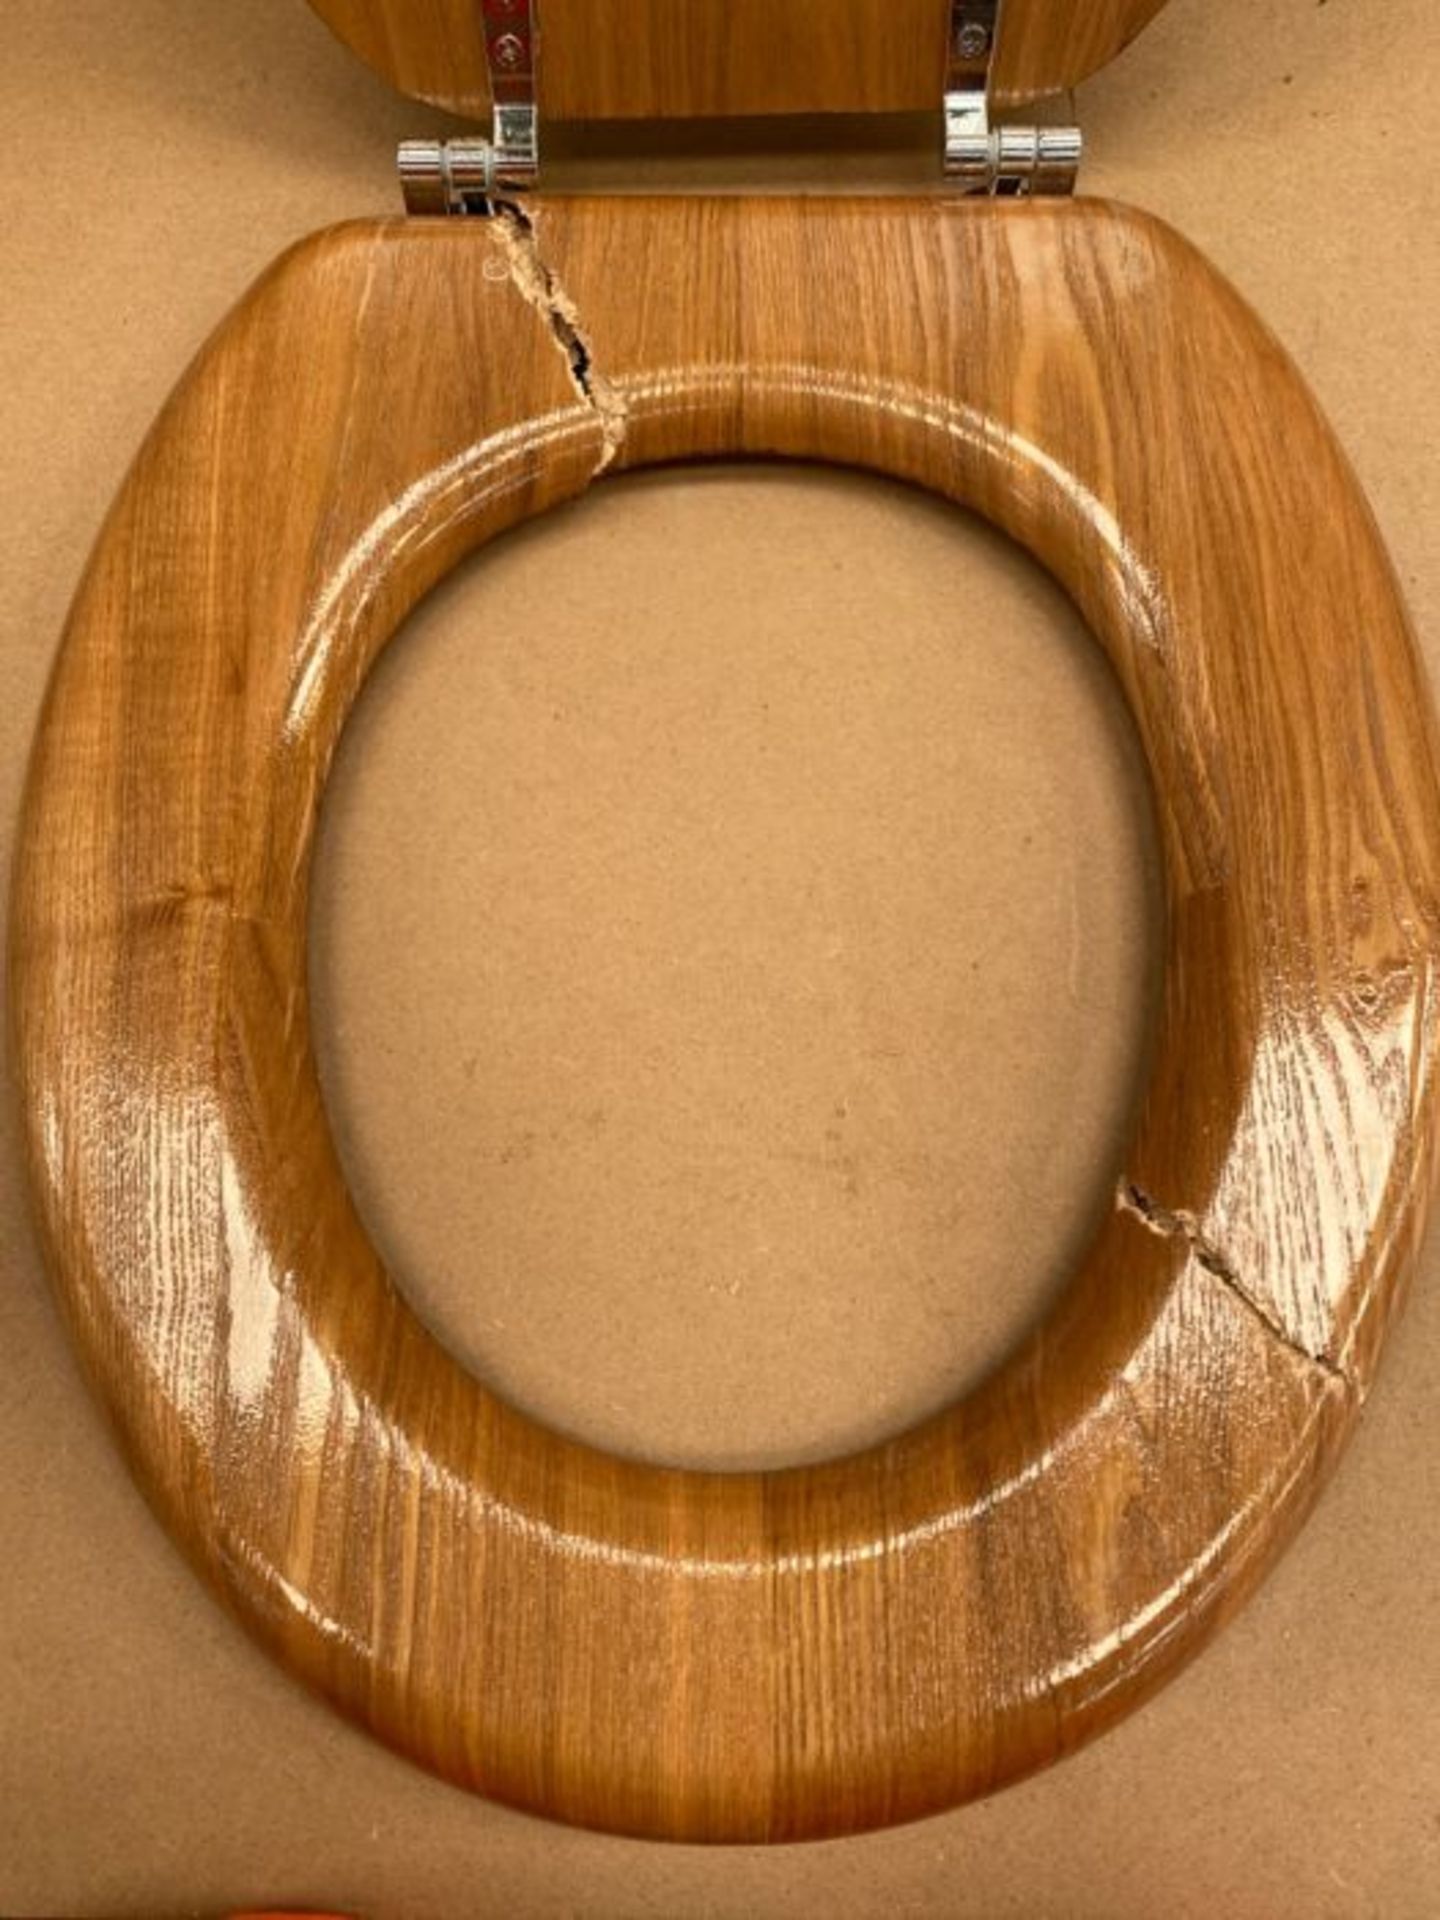 [Cracked] Angel Shield High-Quality Antibacterial Wooden Toilet Seat Adjustable Hinges - Image 3 of 3